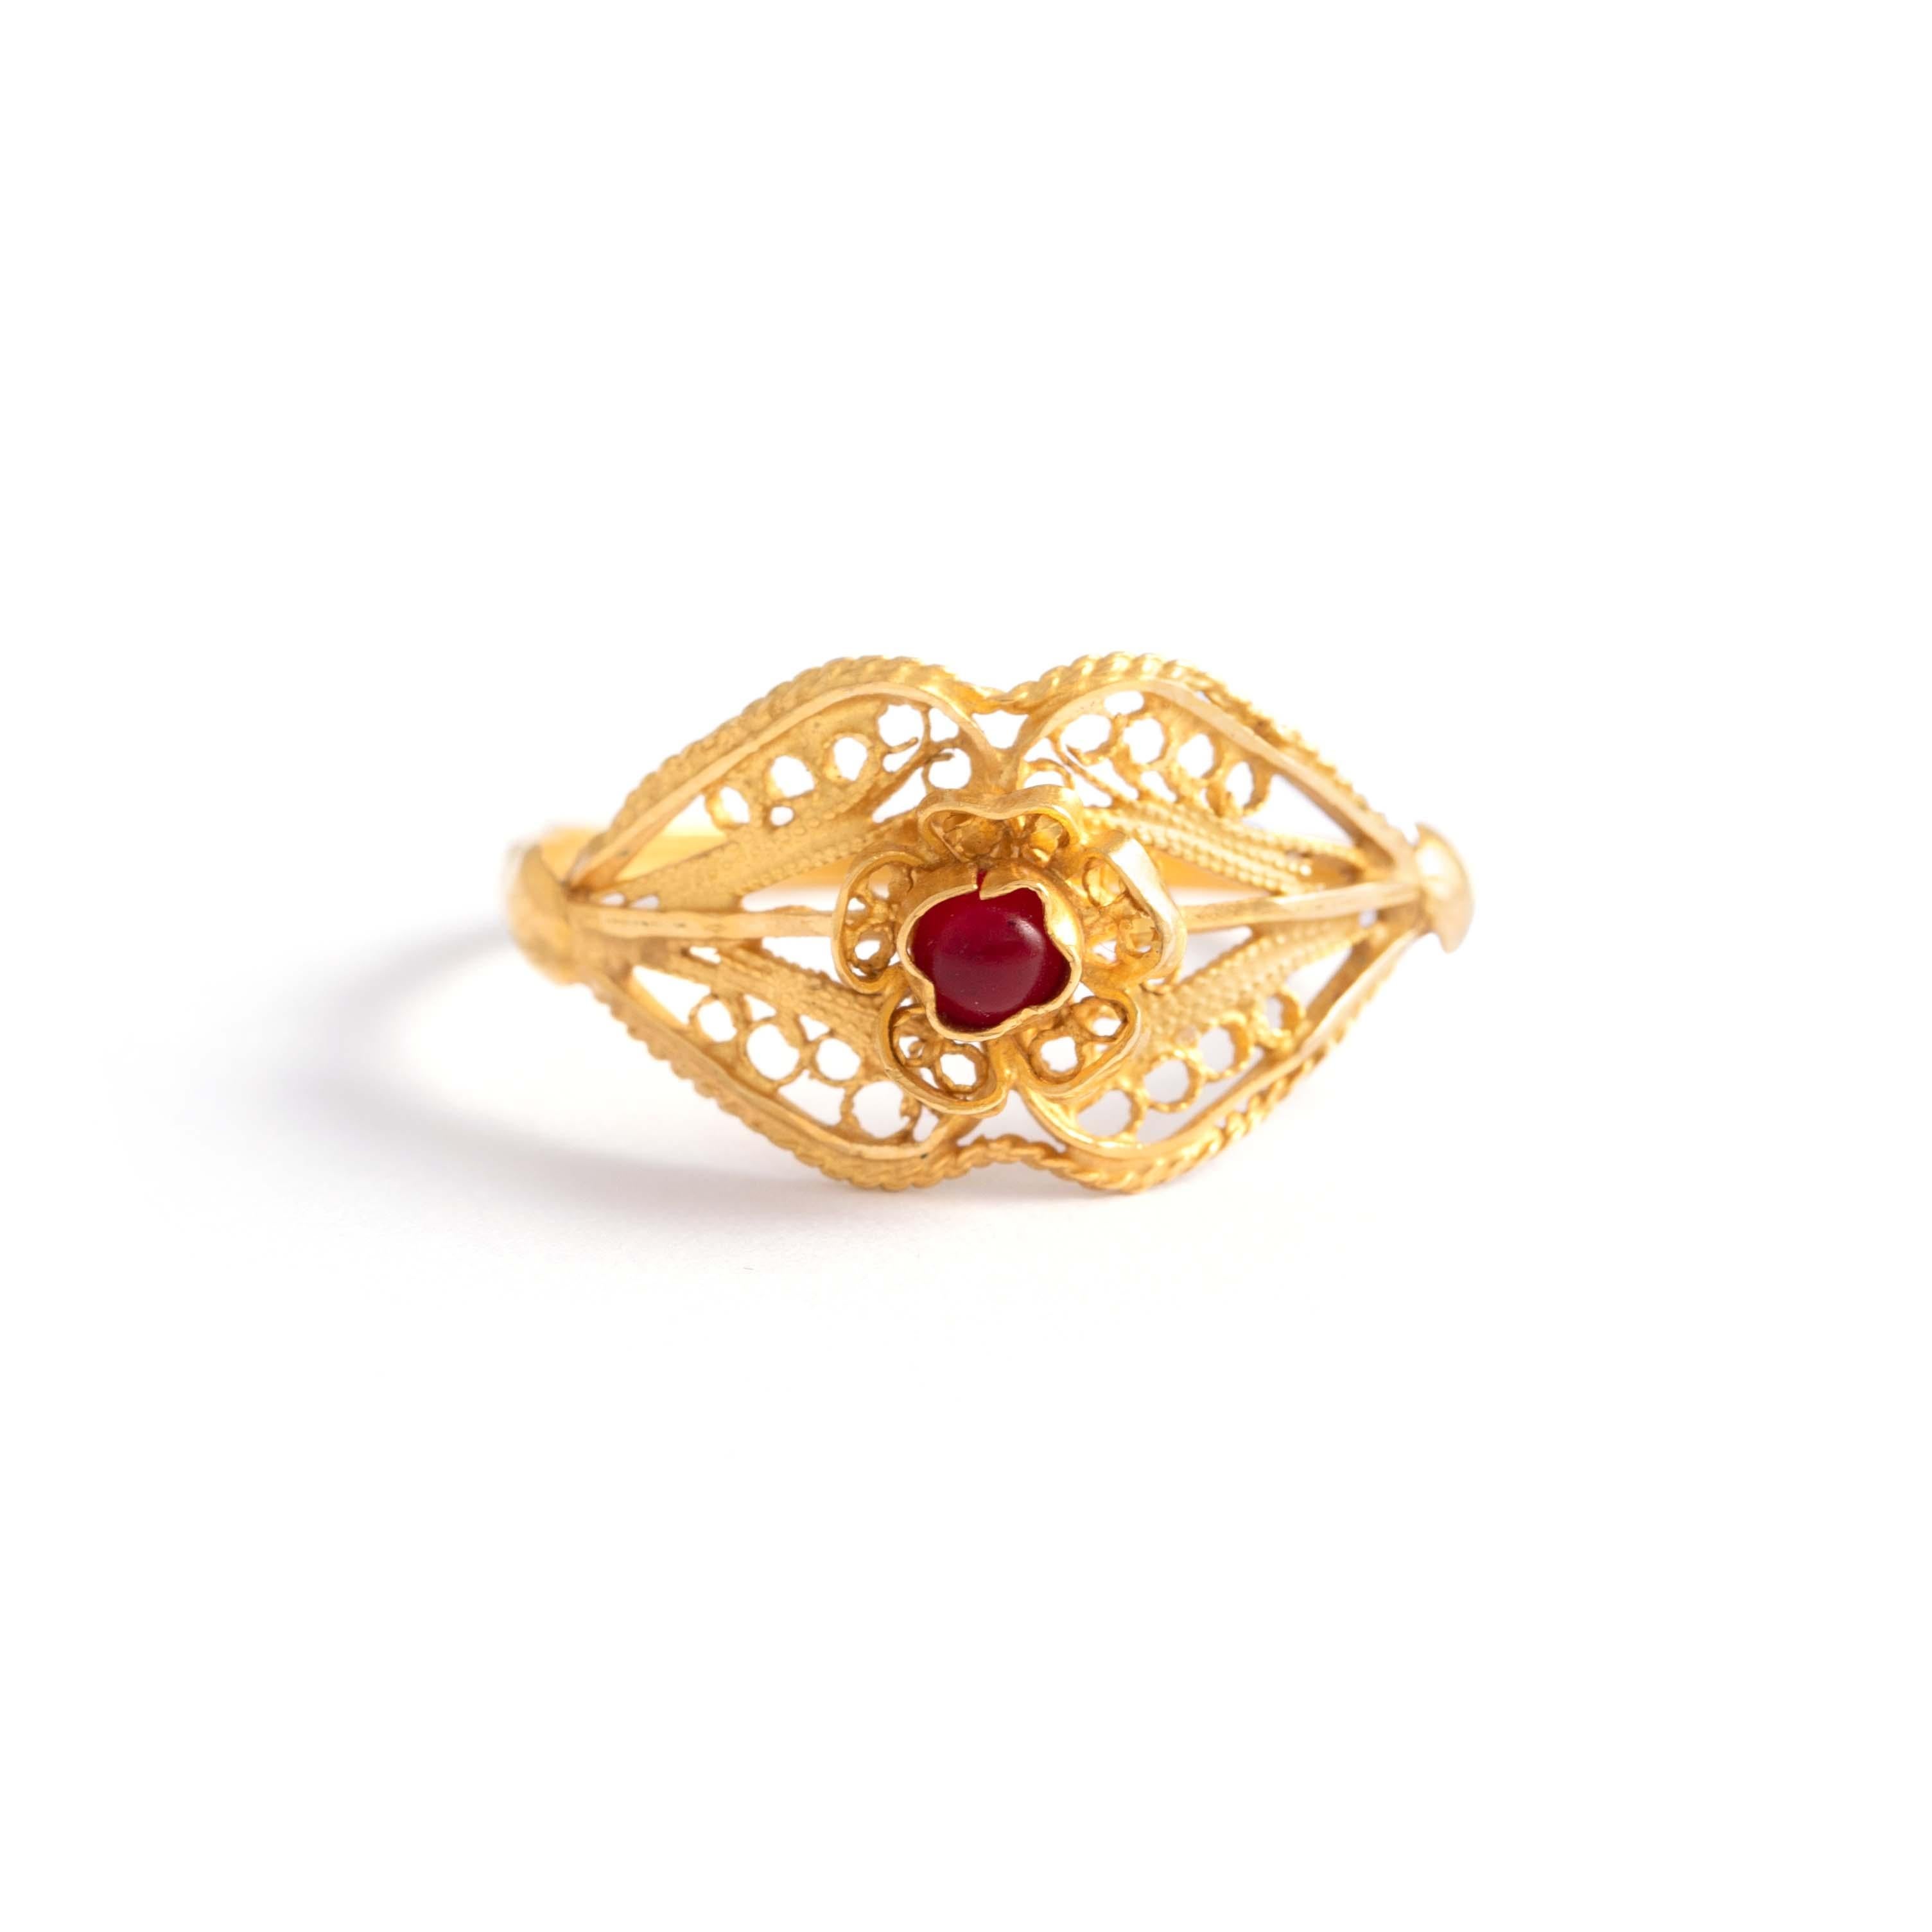 18K yellow gold ring centered with a cabochon-cut red stone. Antique.
Numbered.
Gross weight: 2.19 grams.